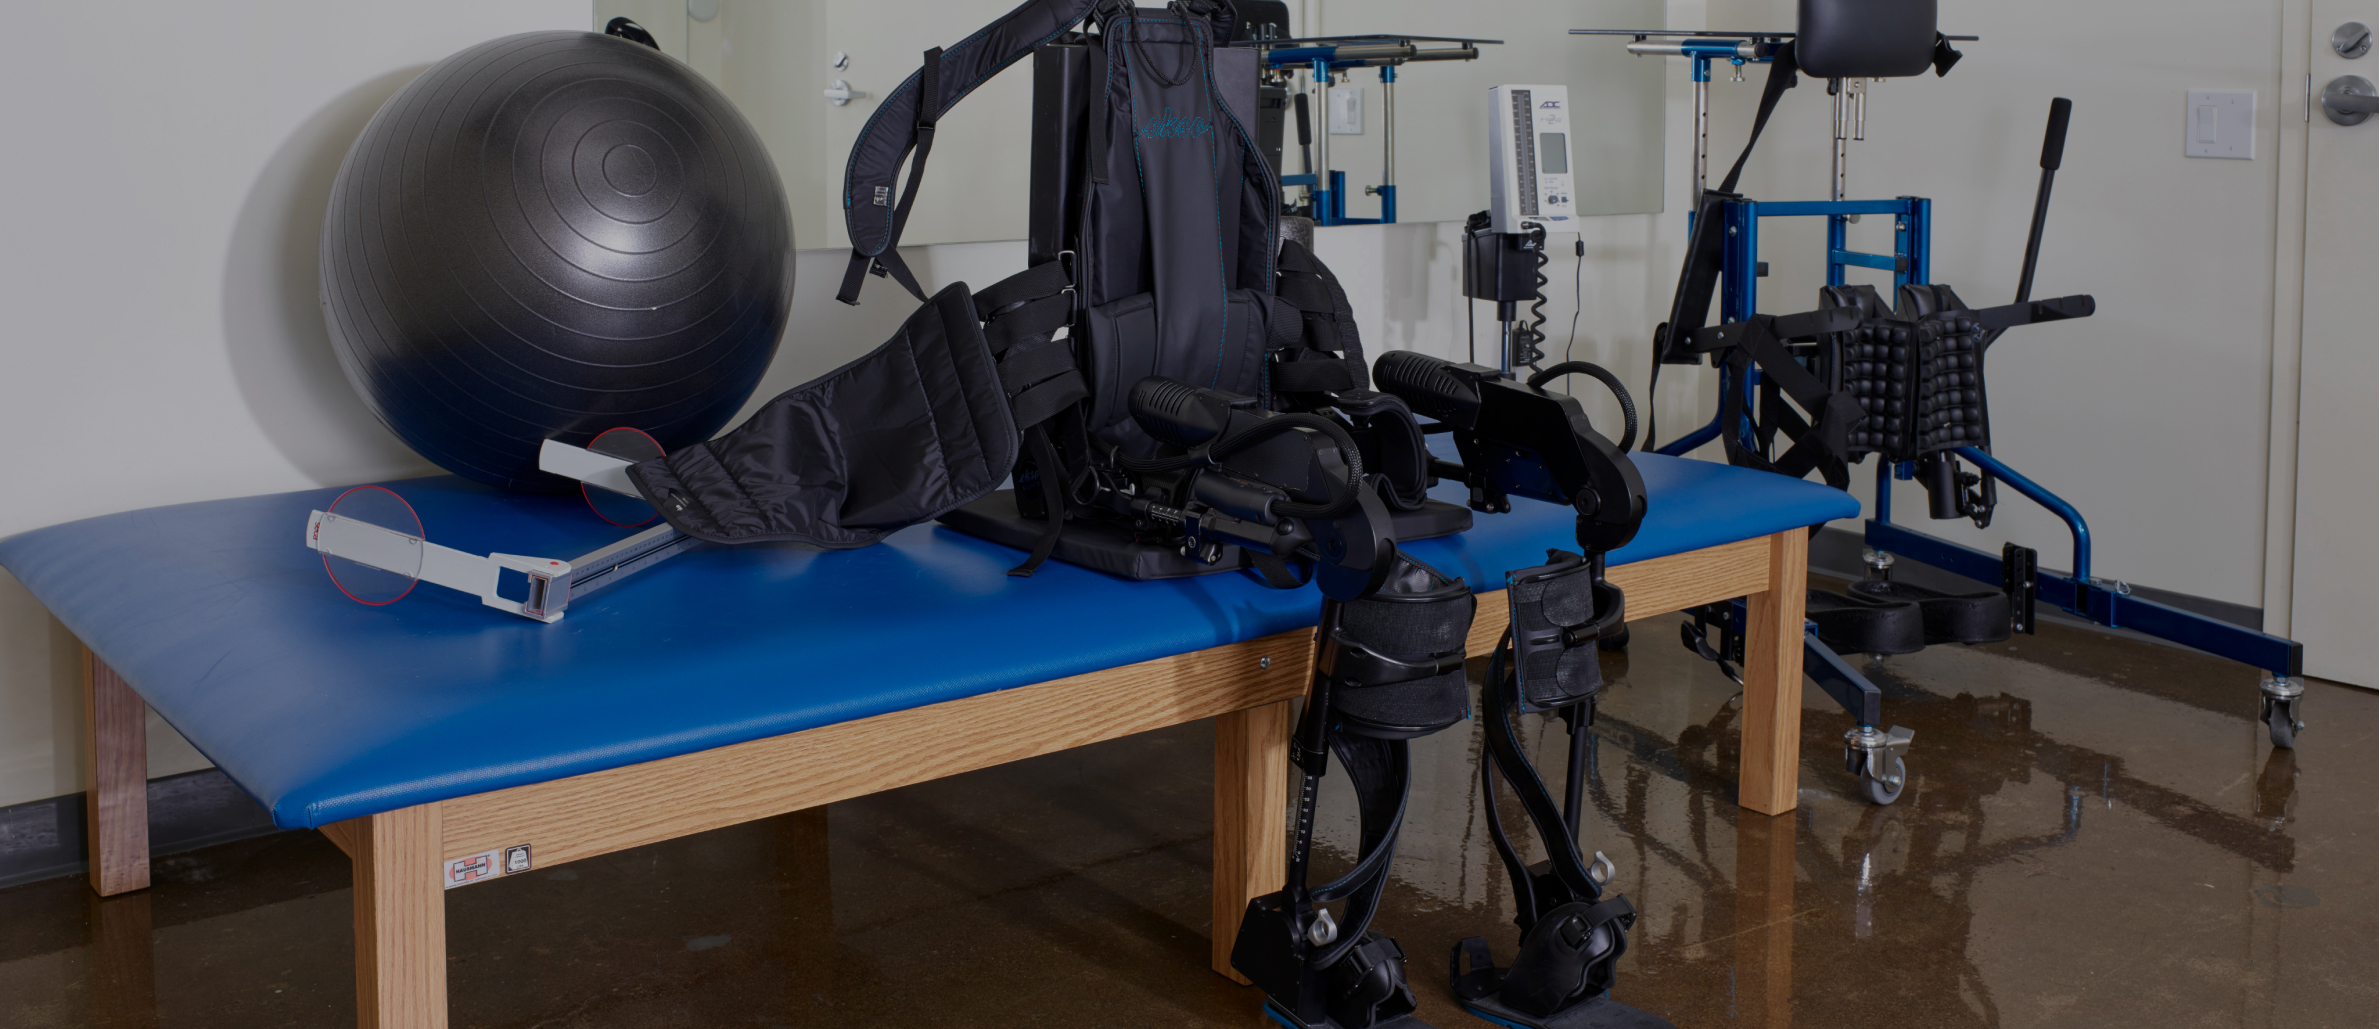 Incredible Exoskeleton Companies and Startups in 2023 You Should Know About